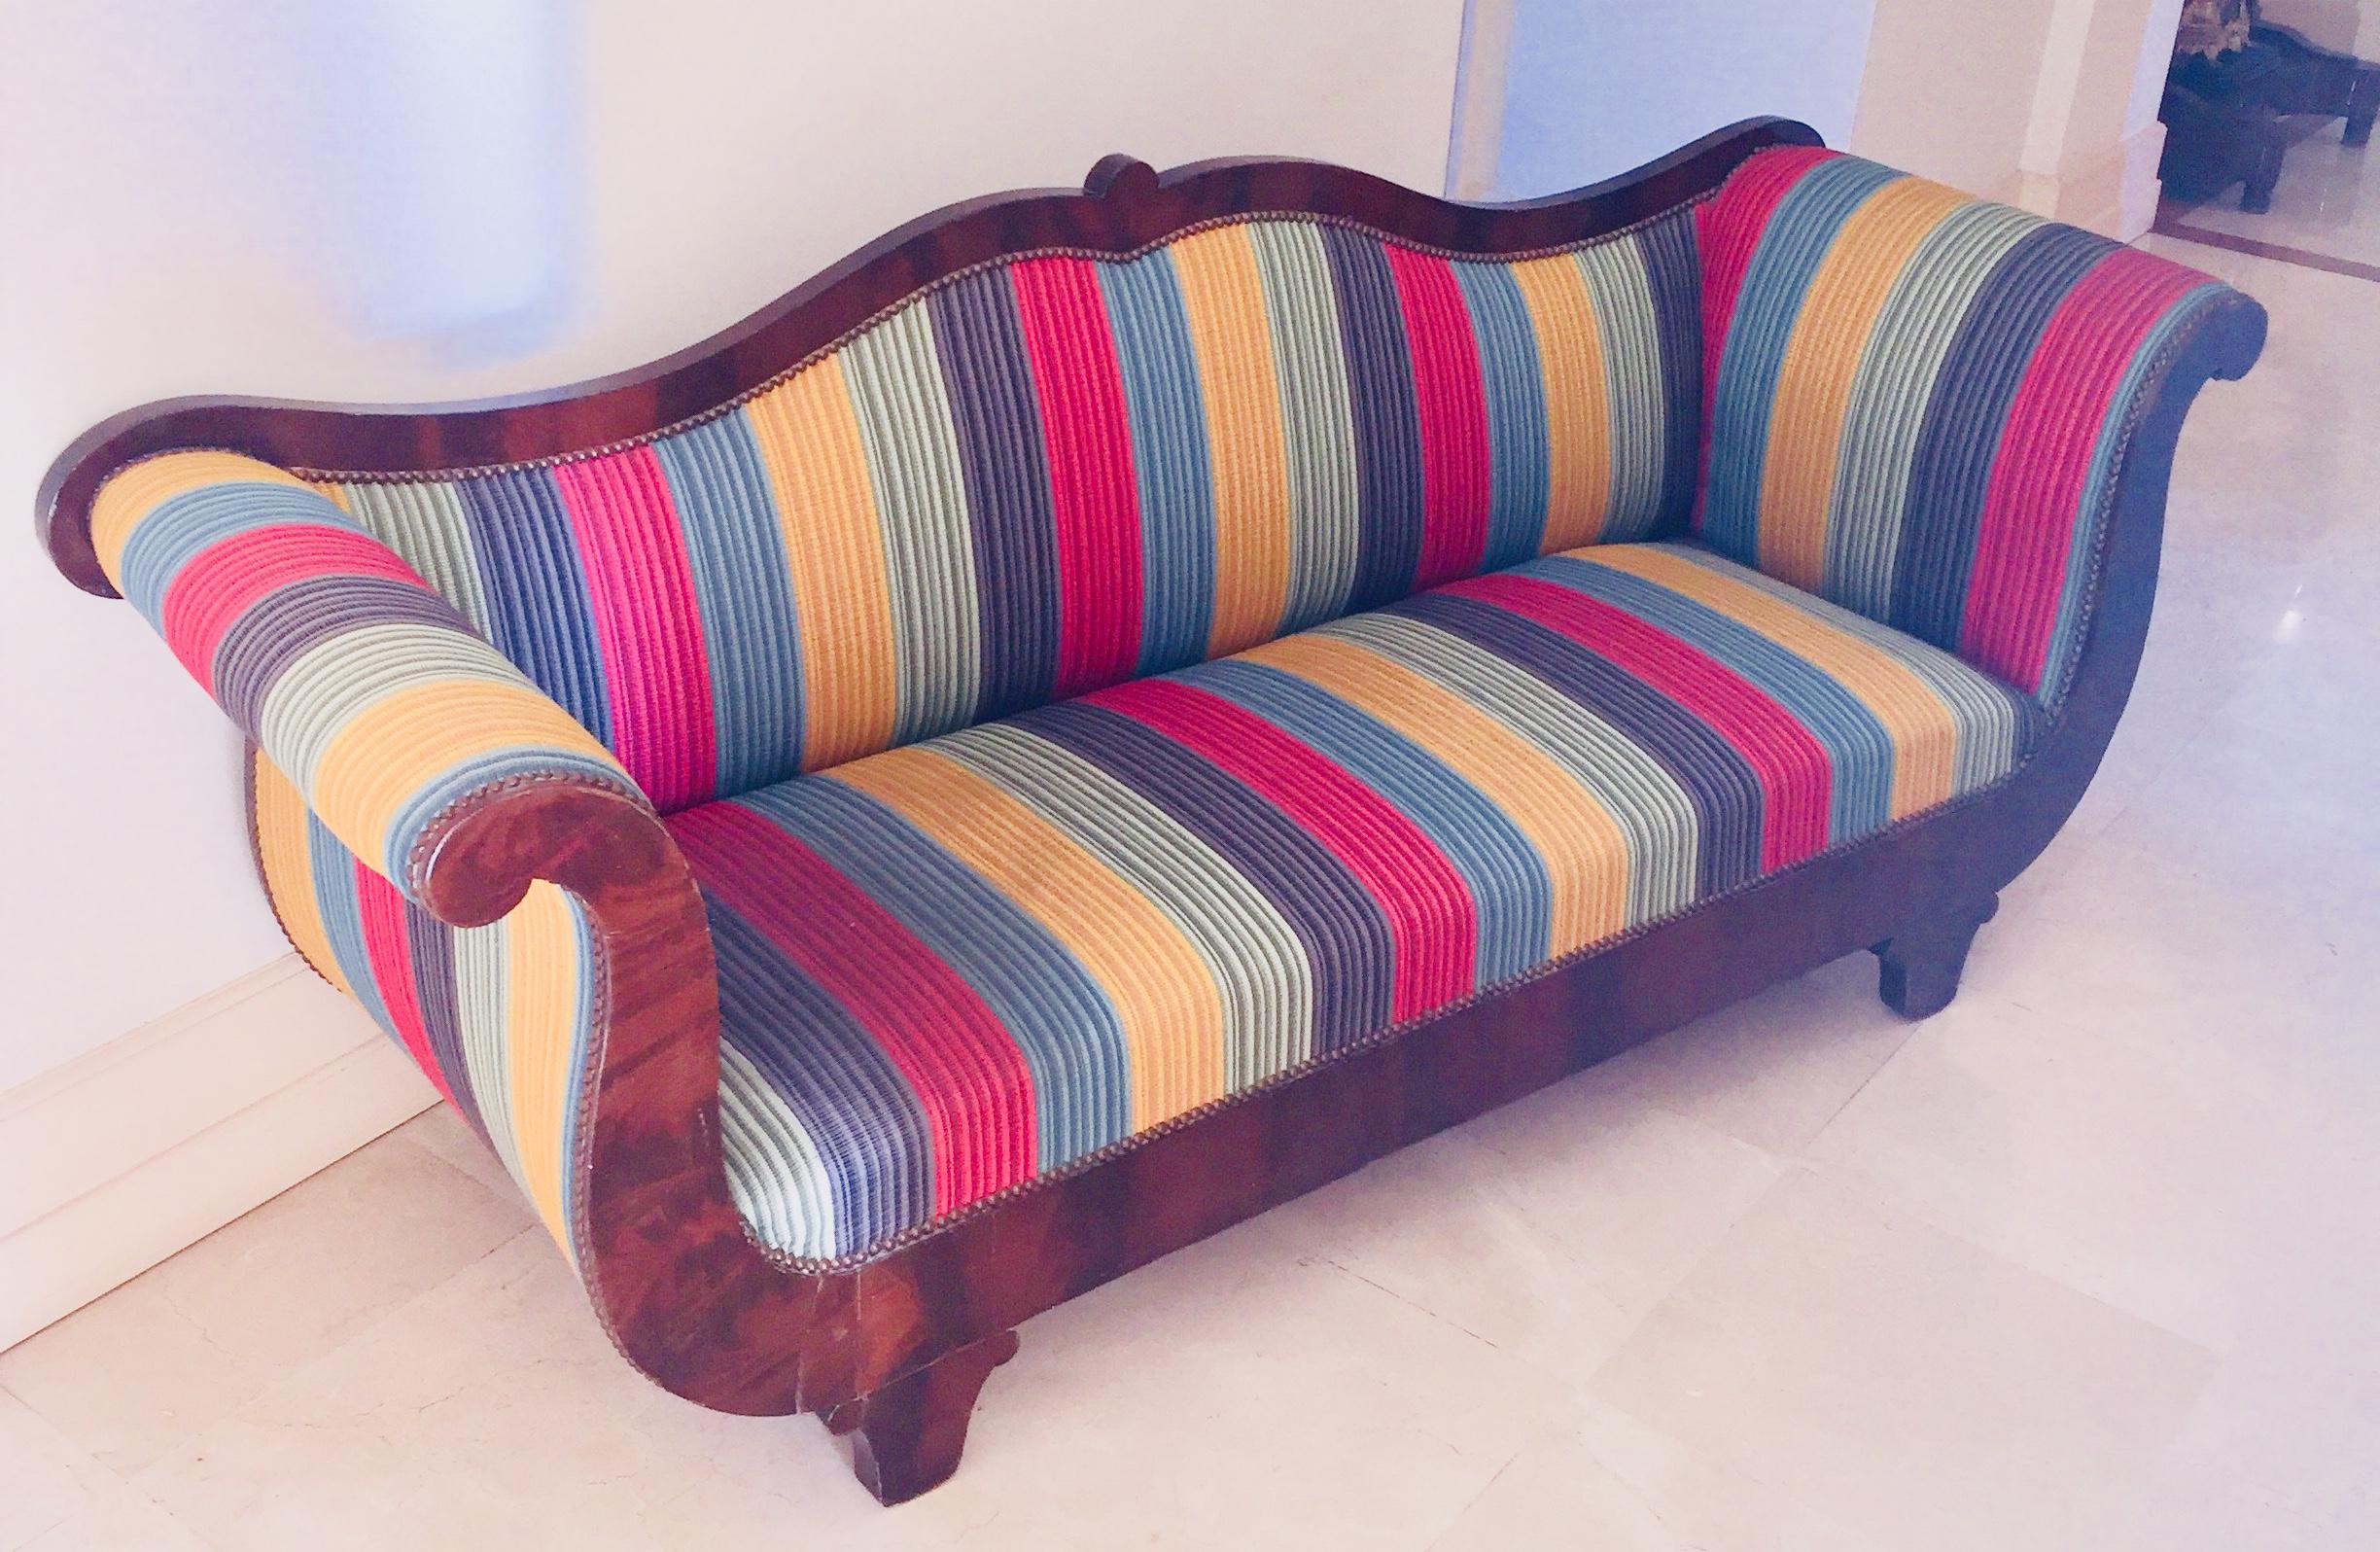 Late 19th Century French Louis Phill Bench, Day Bed in Mahogan Yellow Blue Red Soft Stipes Fabric For Sale